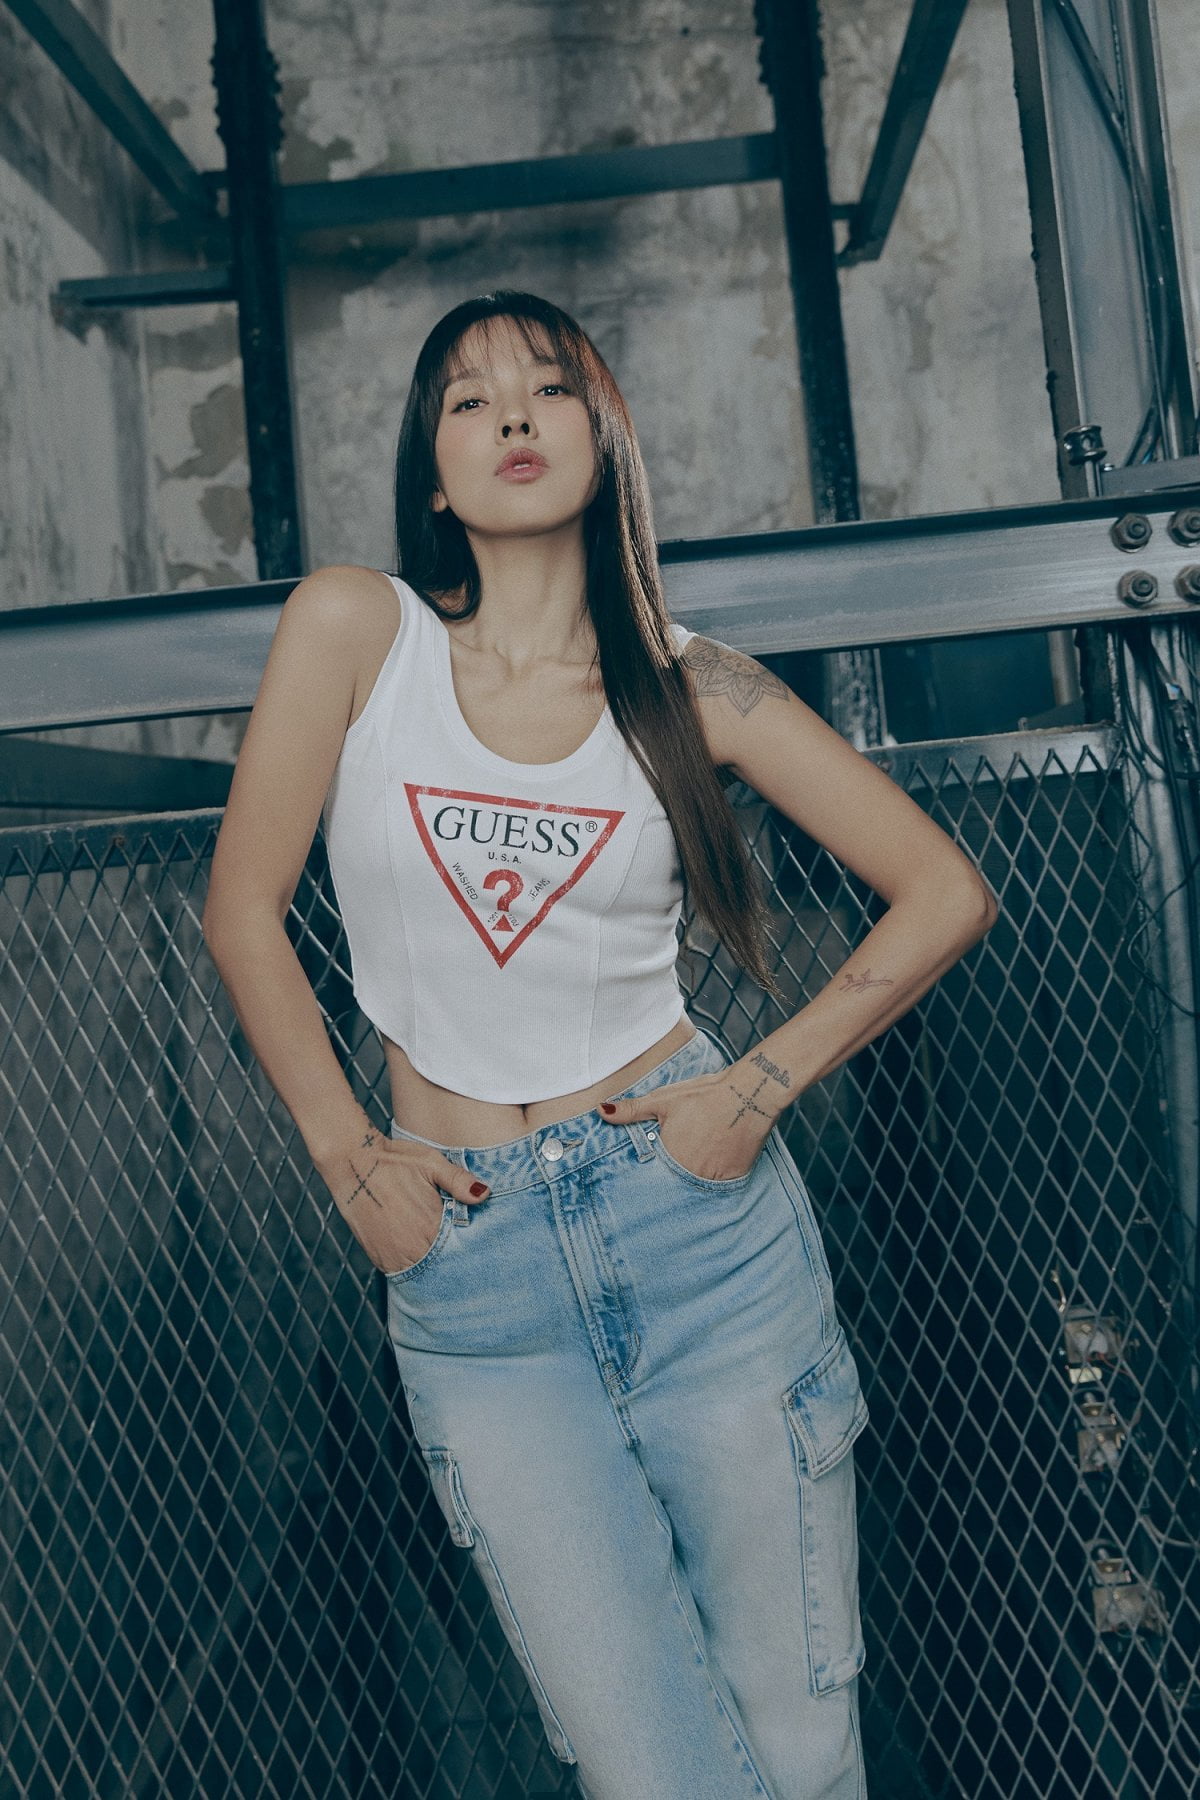 Hyori Lee, ‘Red Carpet’ is over, but her Guess modeling career has just begun